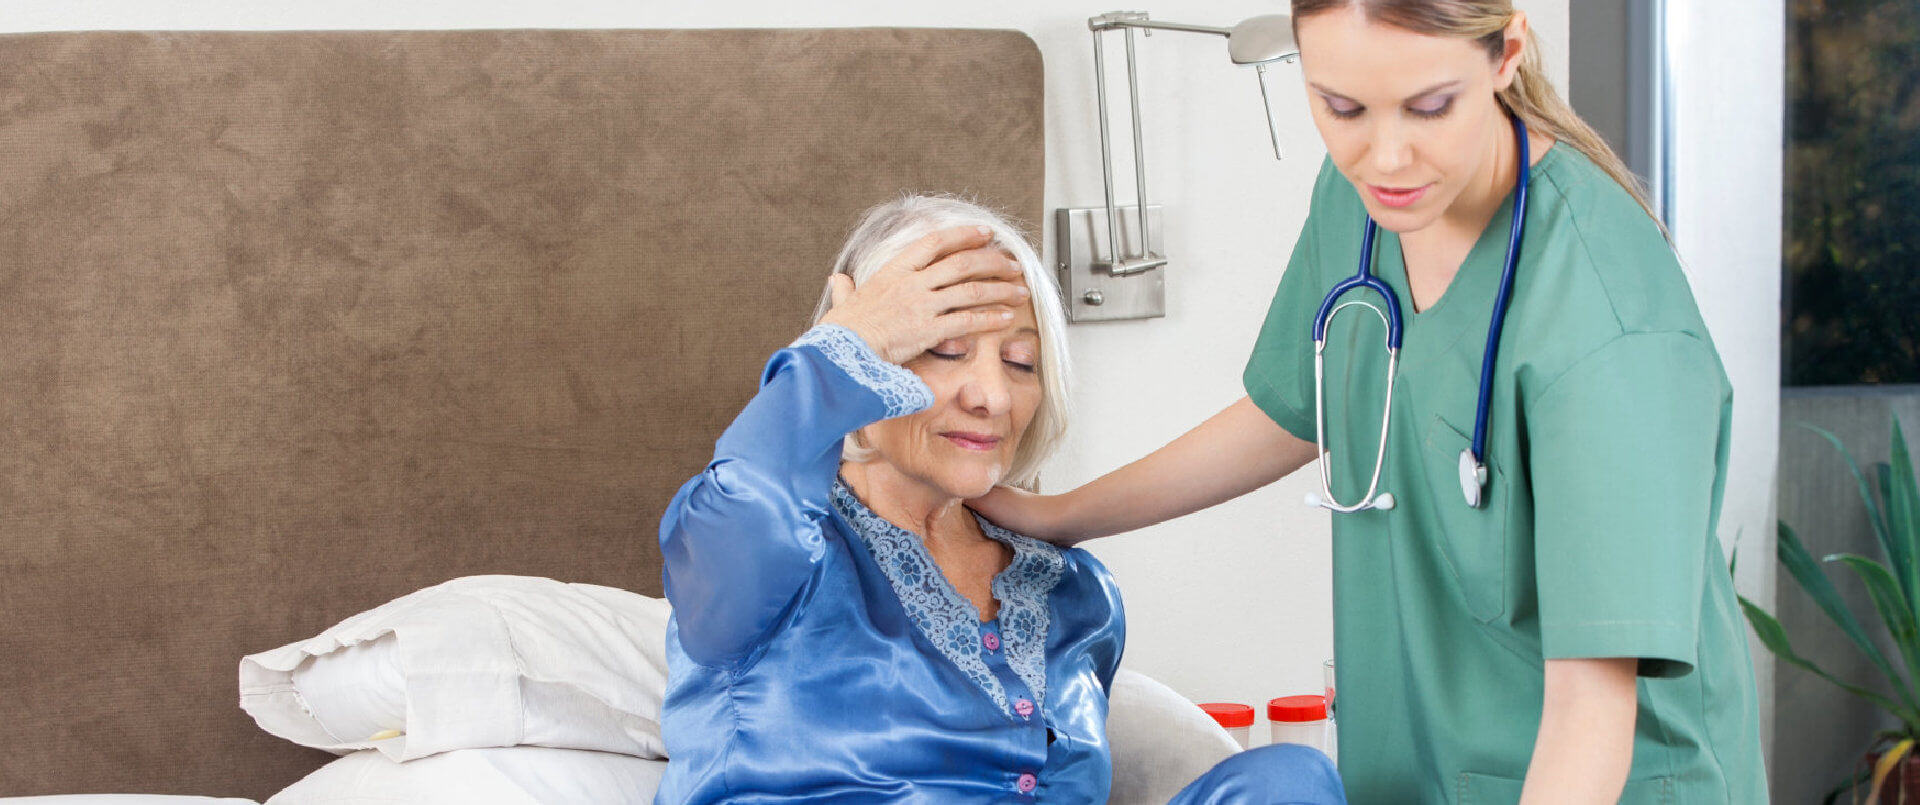 caregiver with stethoscope assisting senior woman